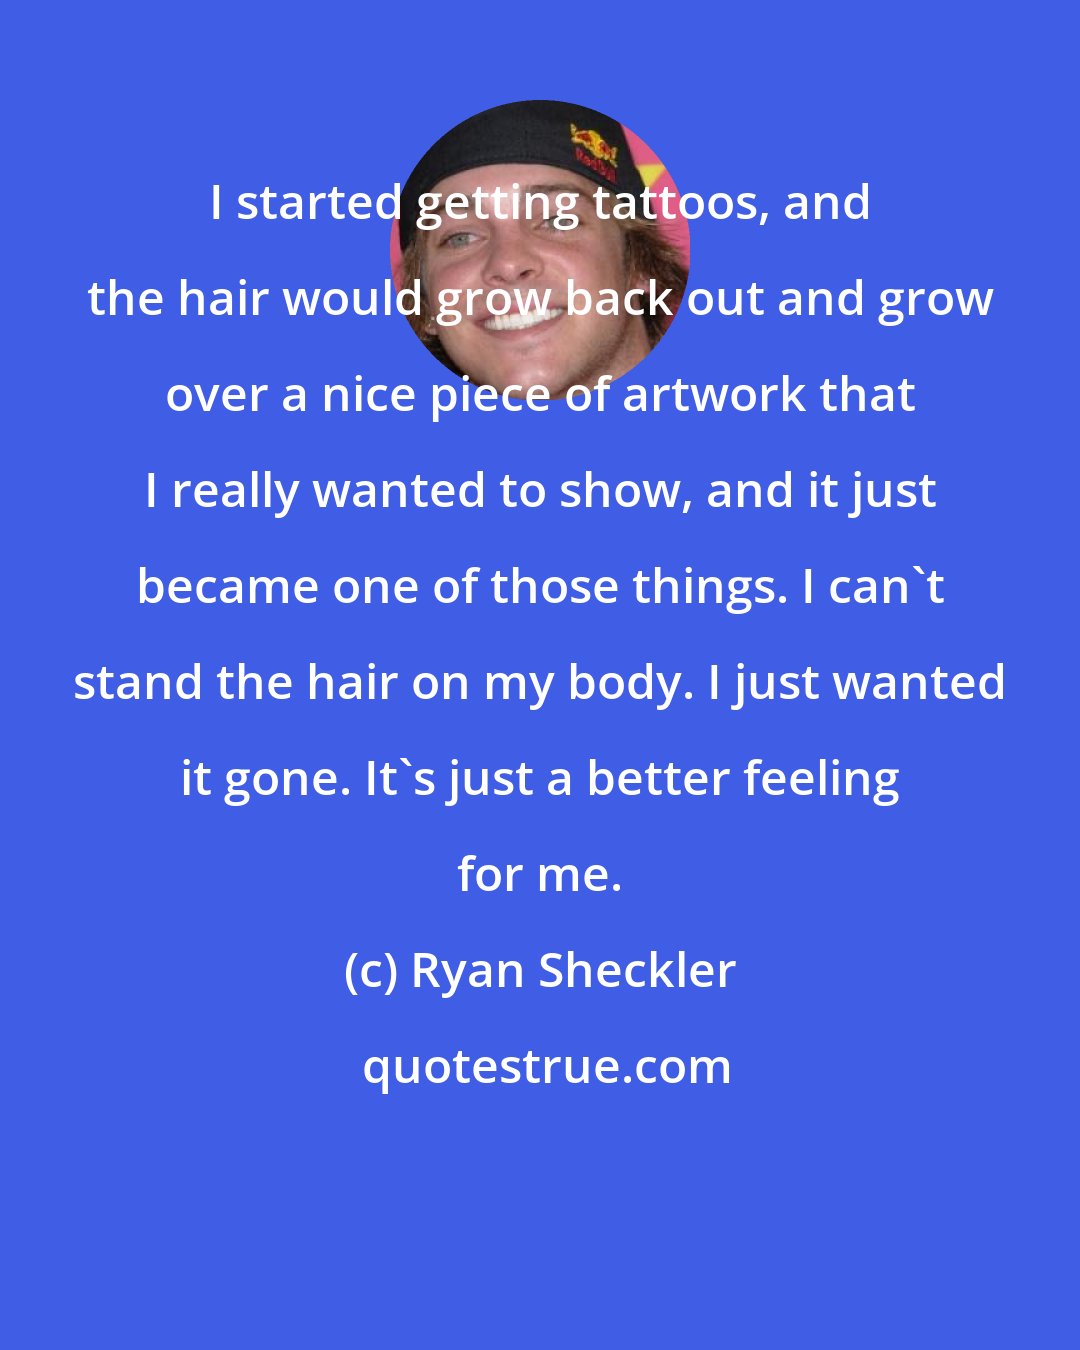 Ryan Sheckler: I started getting tattoos, and the hair would grow back out and grow over a nice piece of artwork that I really wanted to show, and it just became one of those things. I can't stand the hair on my body. I just wanted it gone. It's just a better feeling for me.